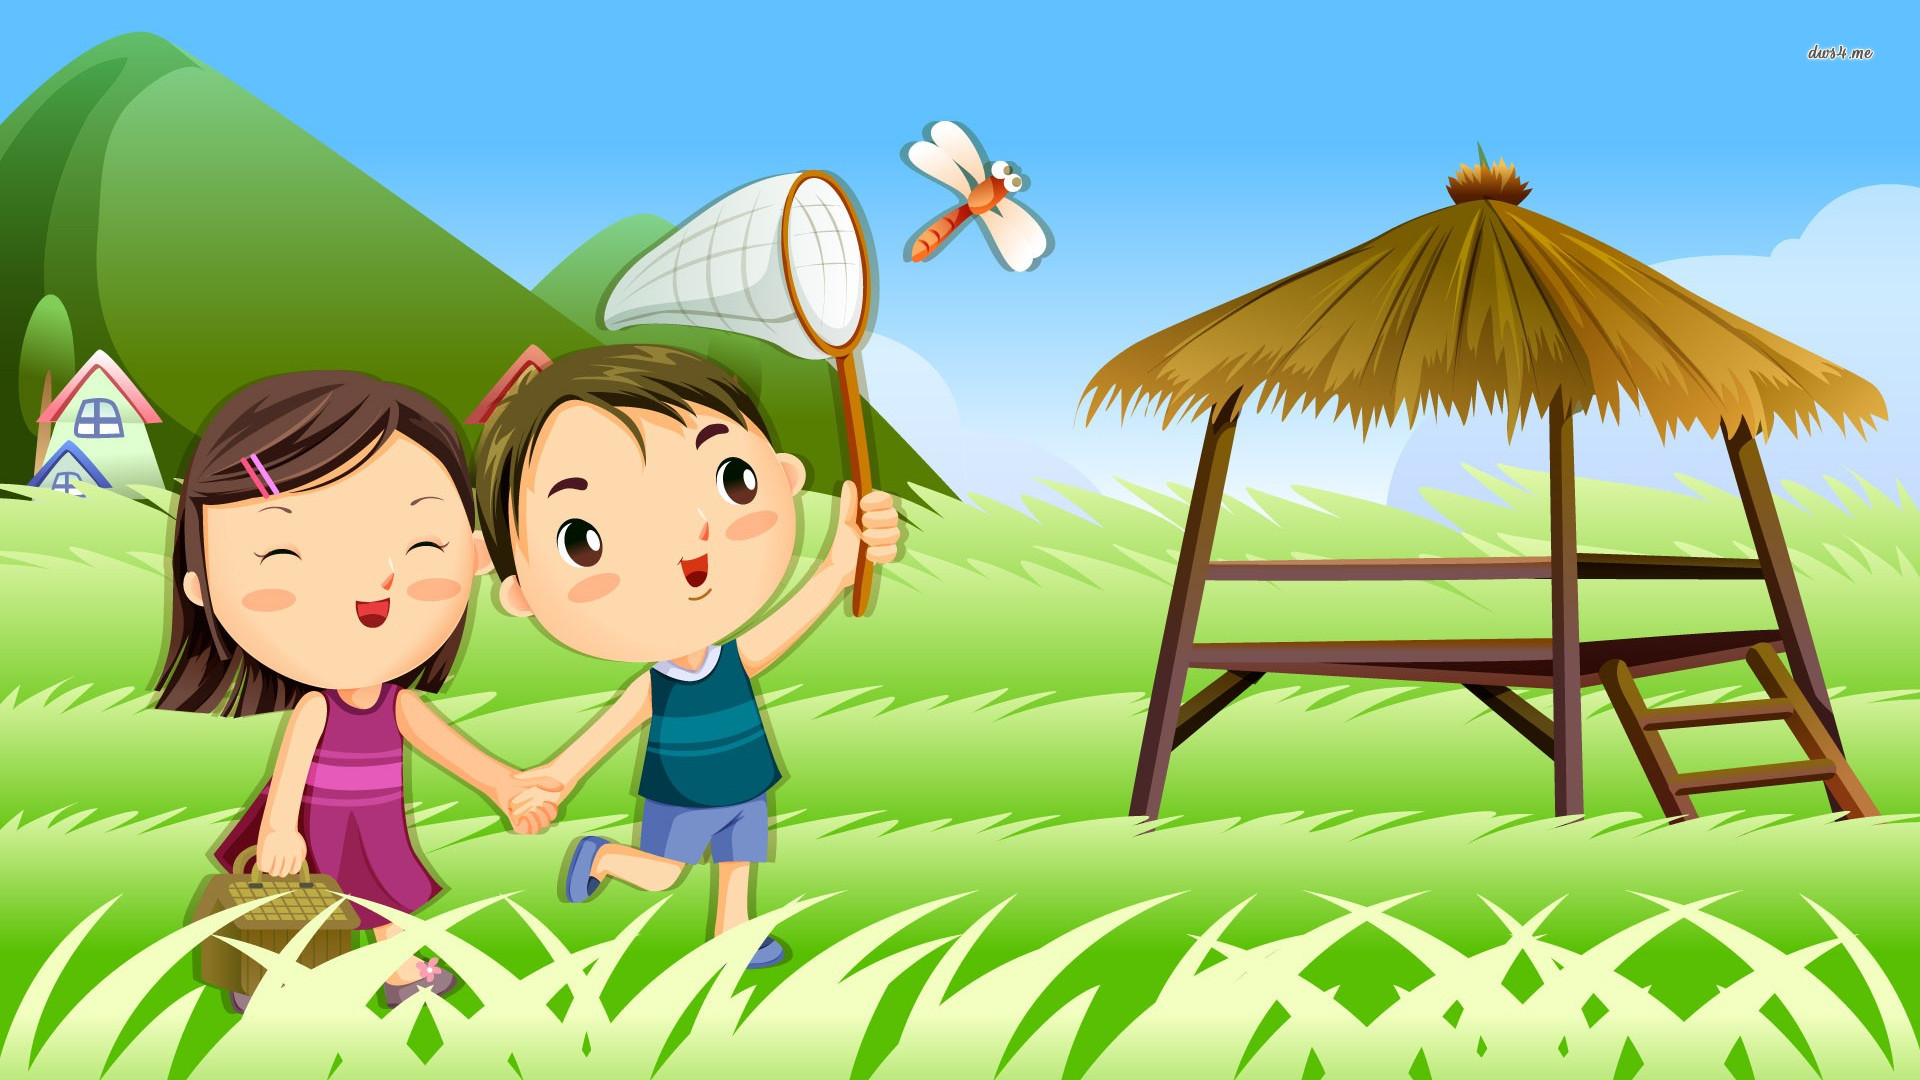 Kids catching a dragonfly wallpaper - Vector wallpapers - #13413